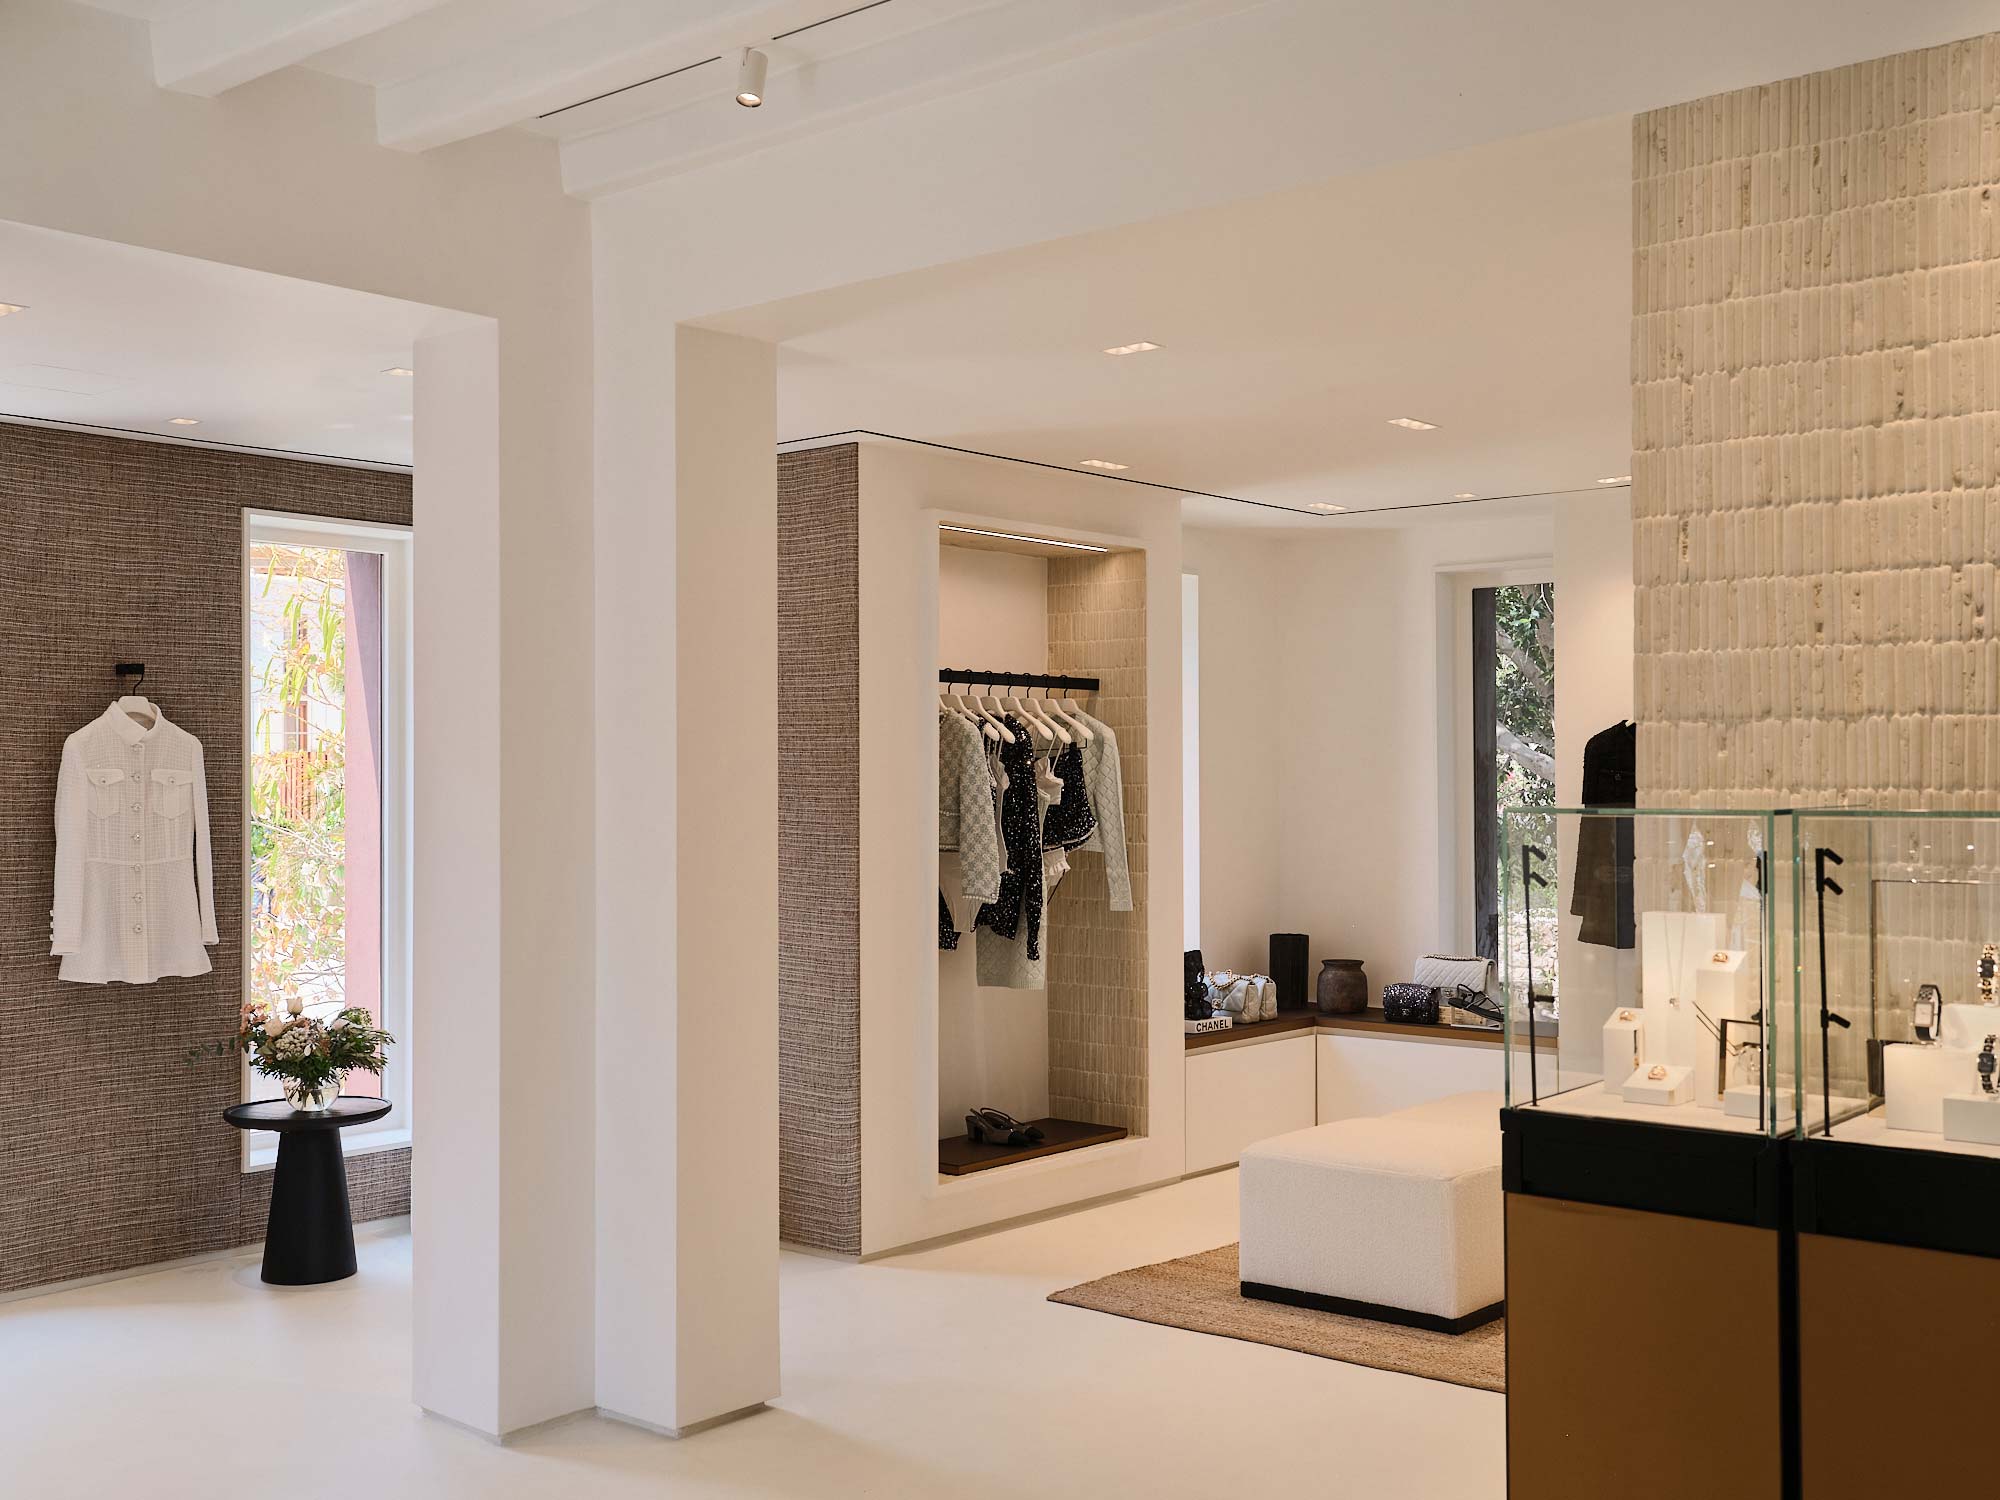 Dior takes rare two-level spot at Highland Park Village that Ralph Lauren  vacated